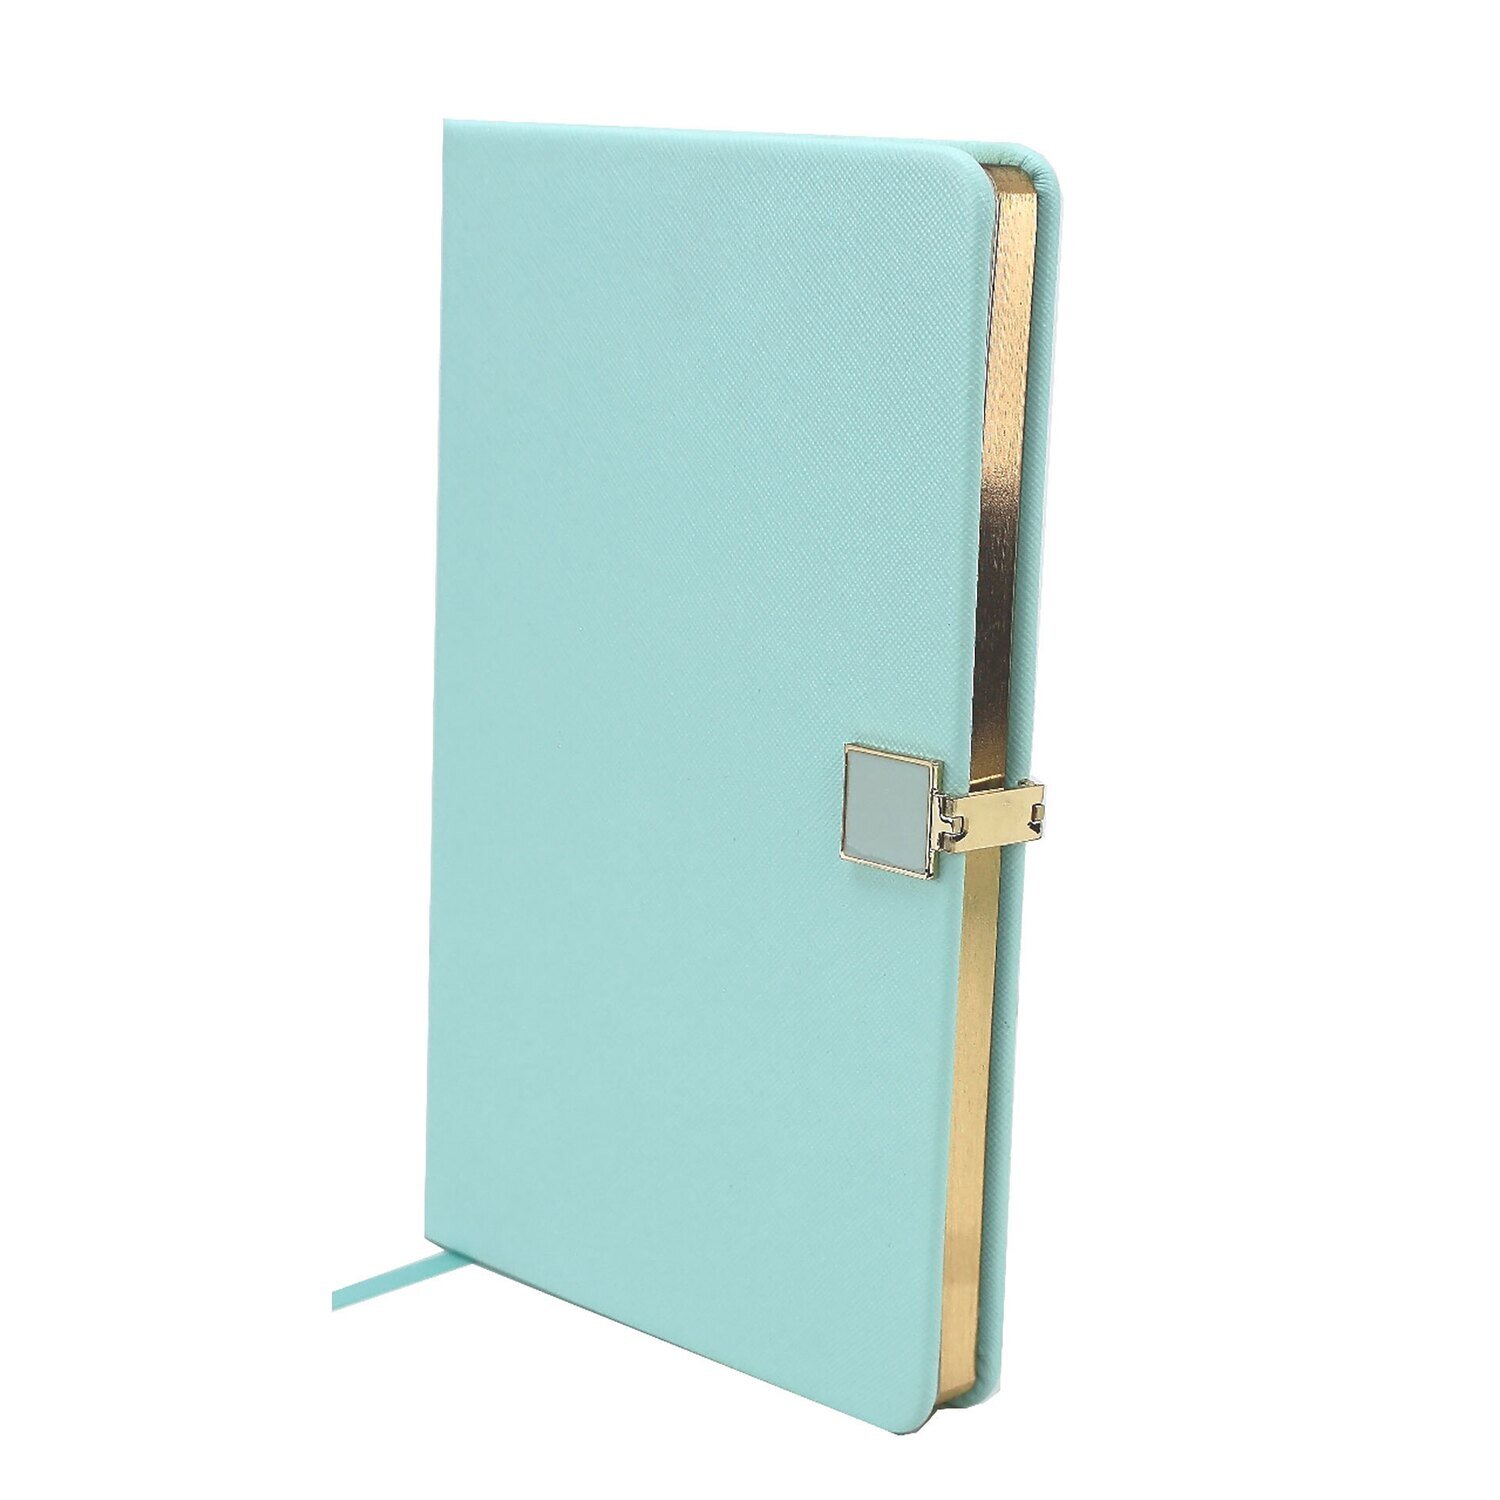 Addison Ross Mint & Gold Notebook A5 Inch Pu Leather NB1001